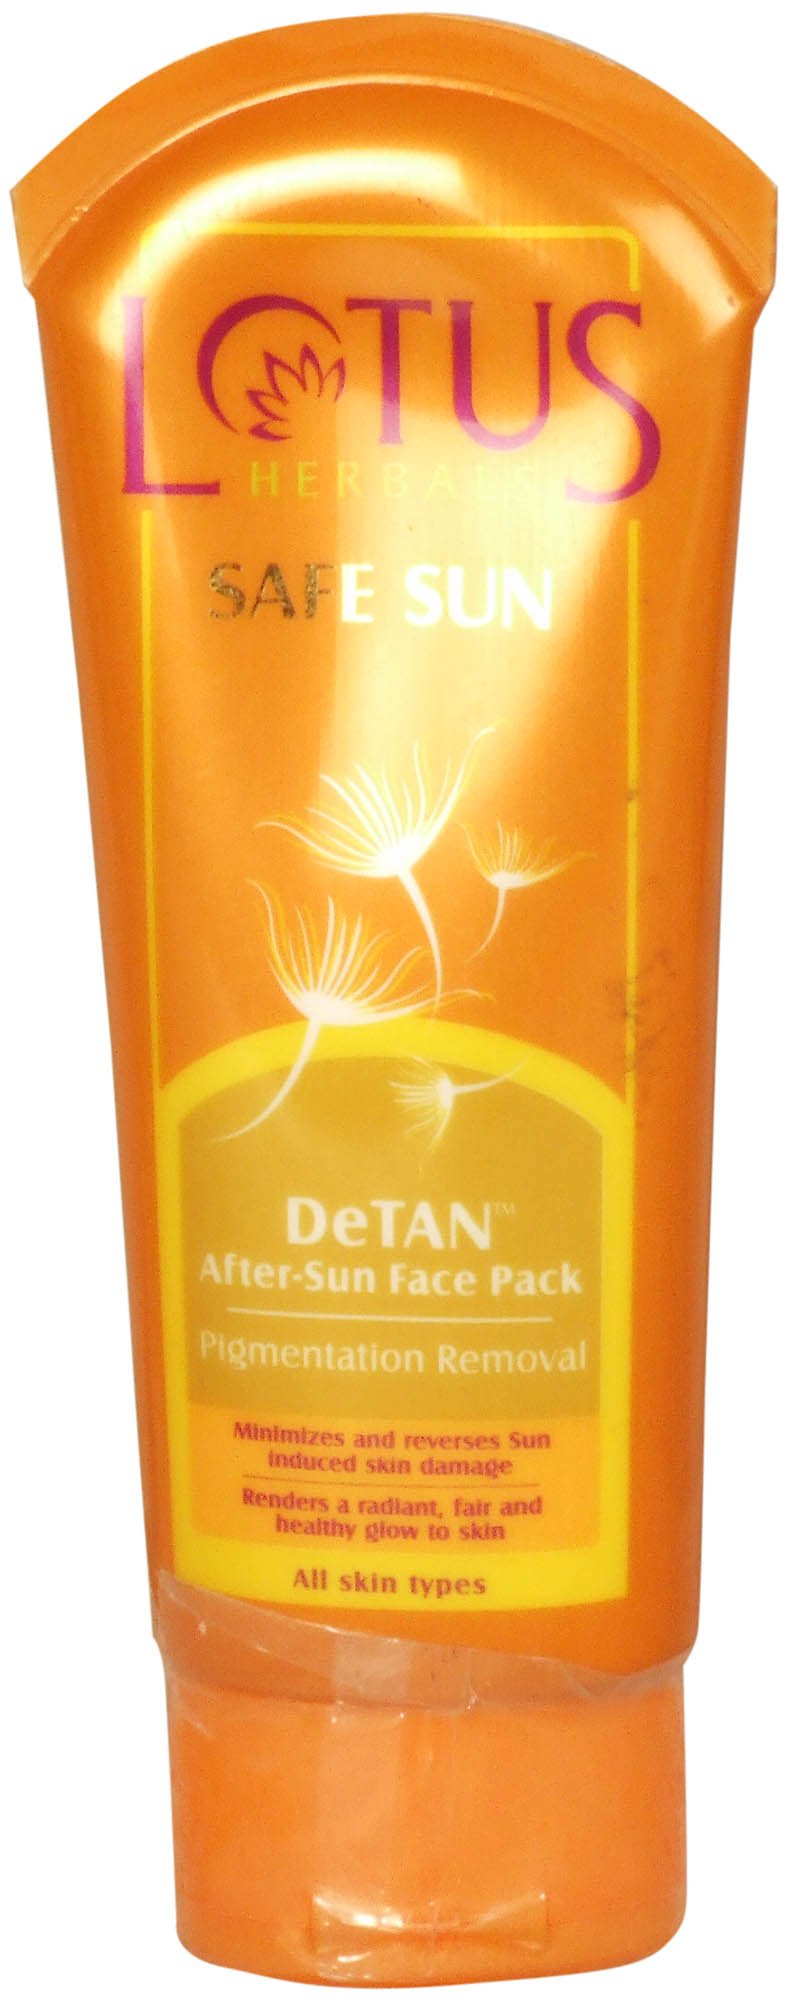 Detan After-Sun Face Pack (Pigmentation Removal) (Safe Sun Lotus Herbals) - book cover